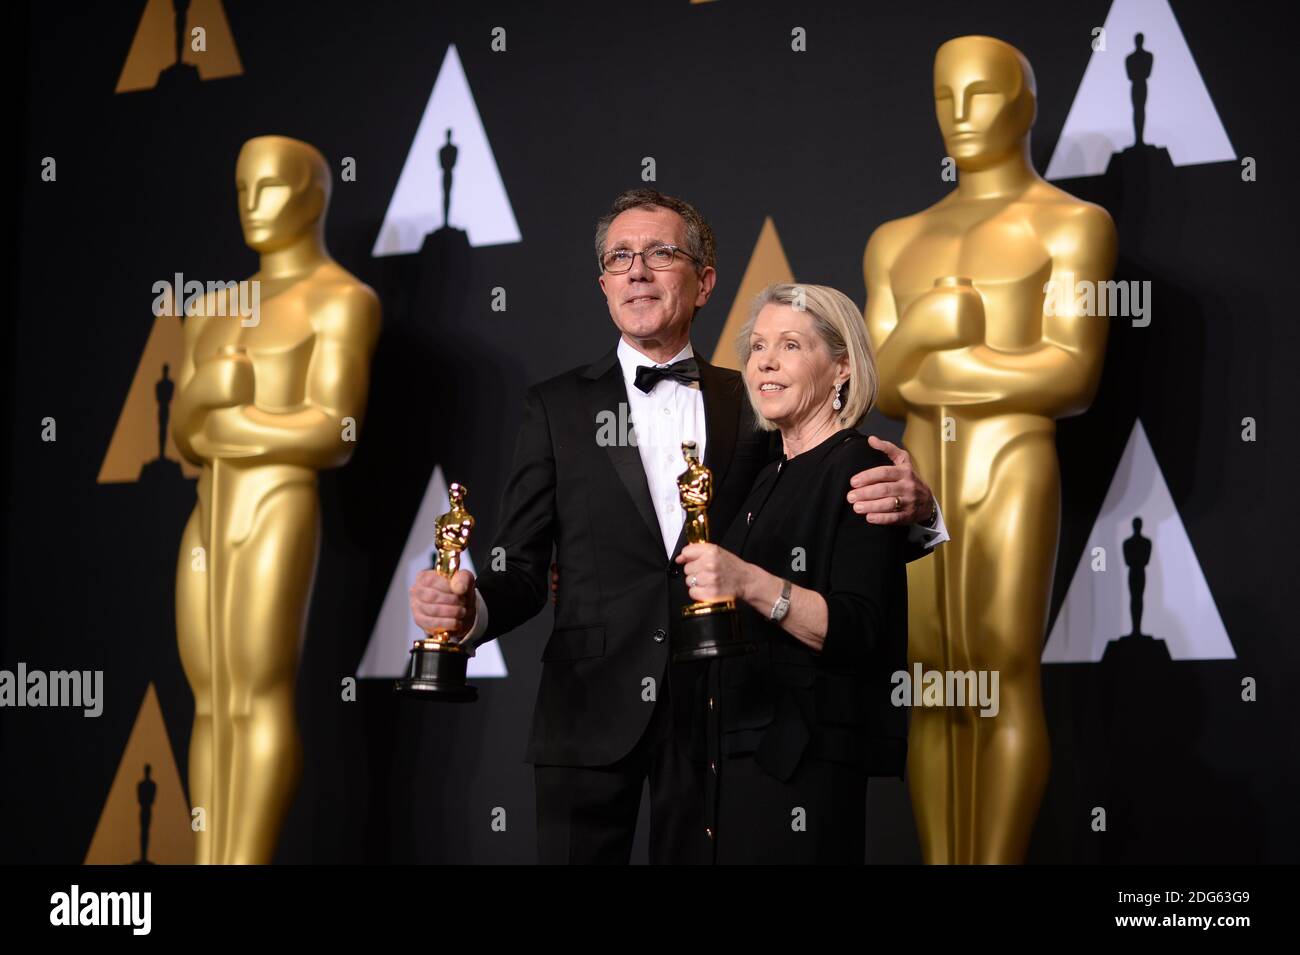 L-R) Production designer David Wasco and art director Sandy Reynolds-Wasco,  winners of the Best Production Design award for 'La La Land,' pose in the  press room during the 89th Annual Academy Awards